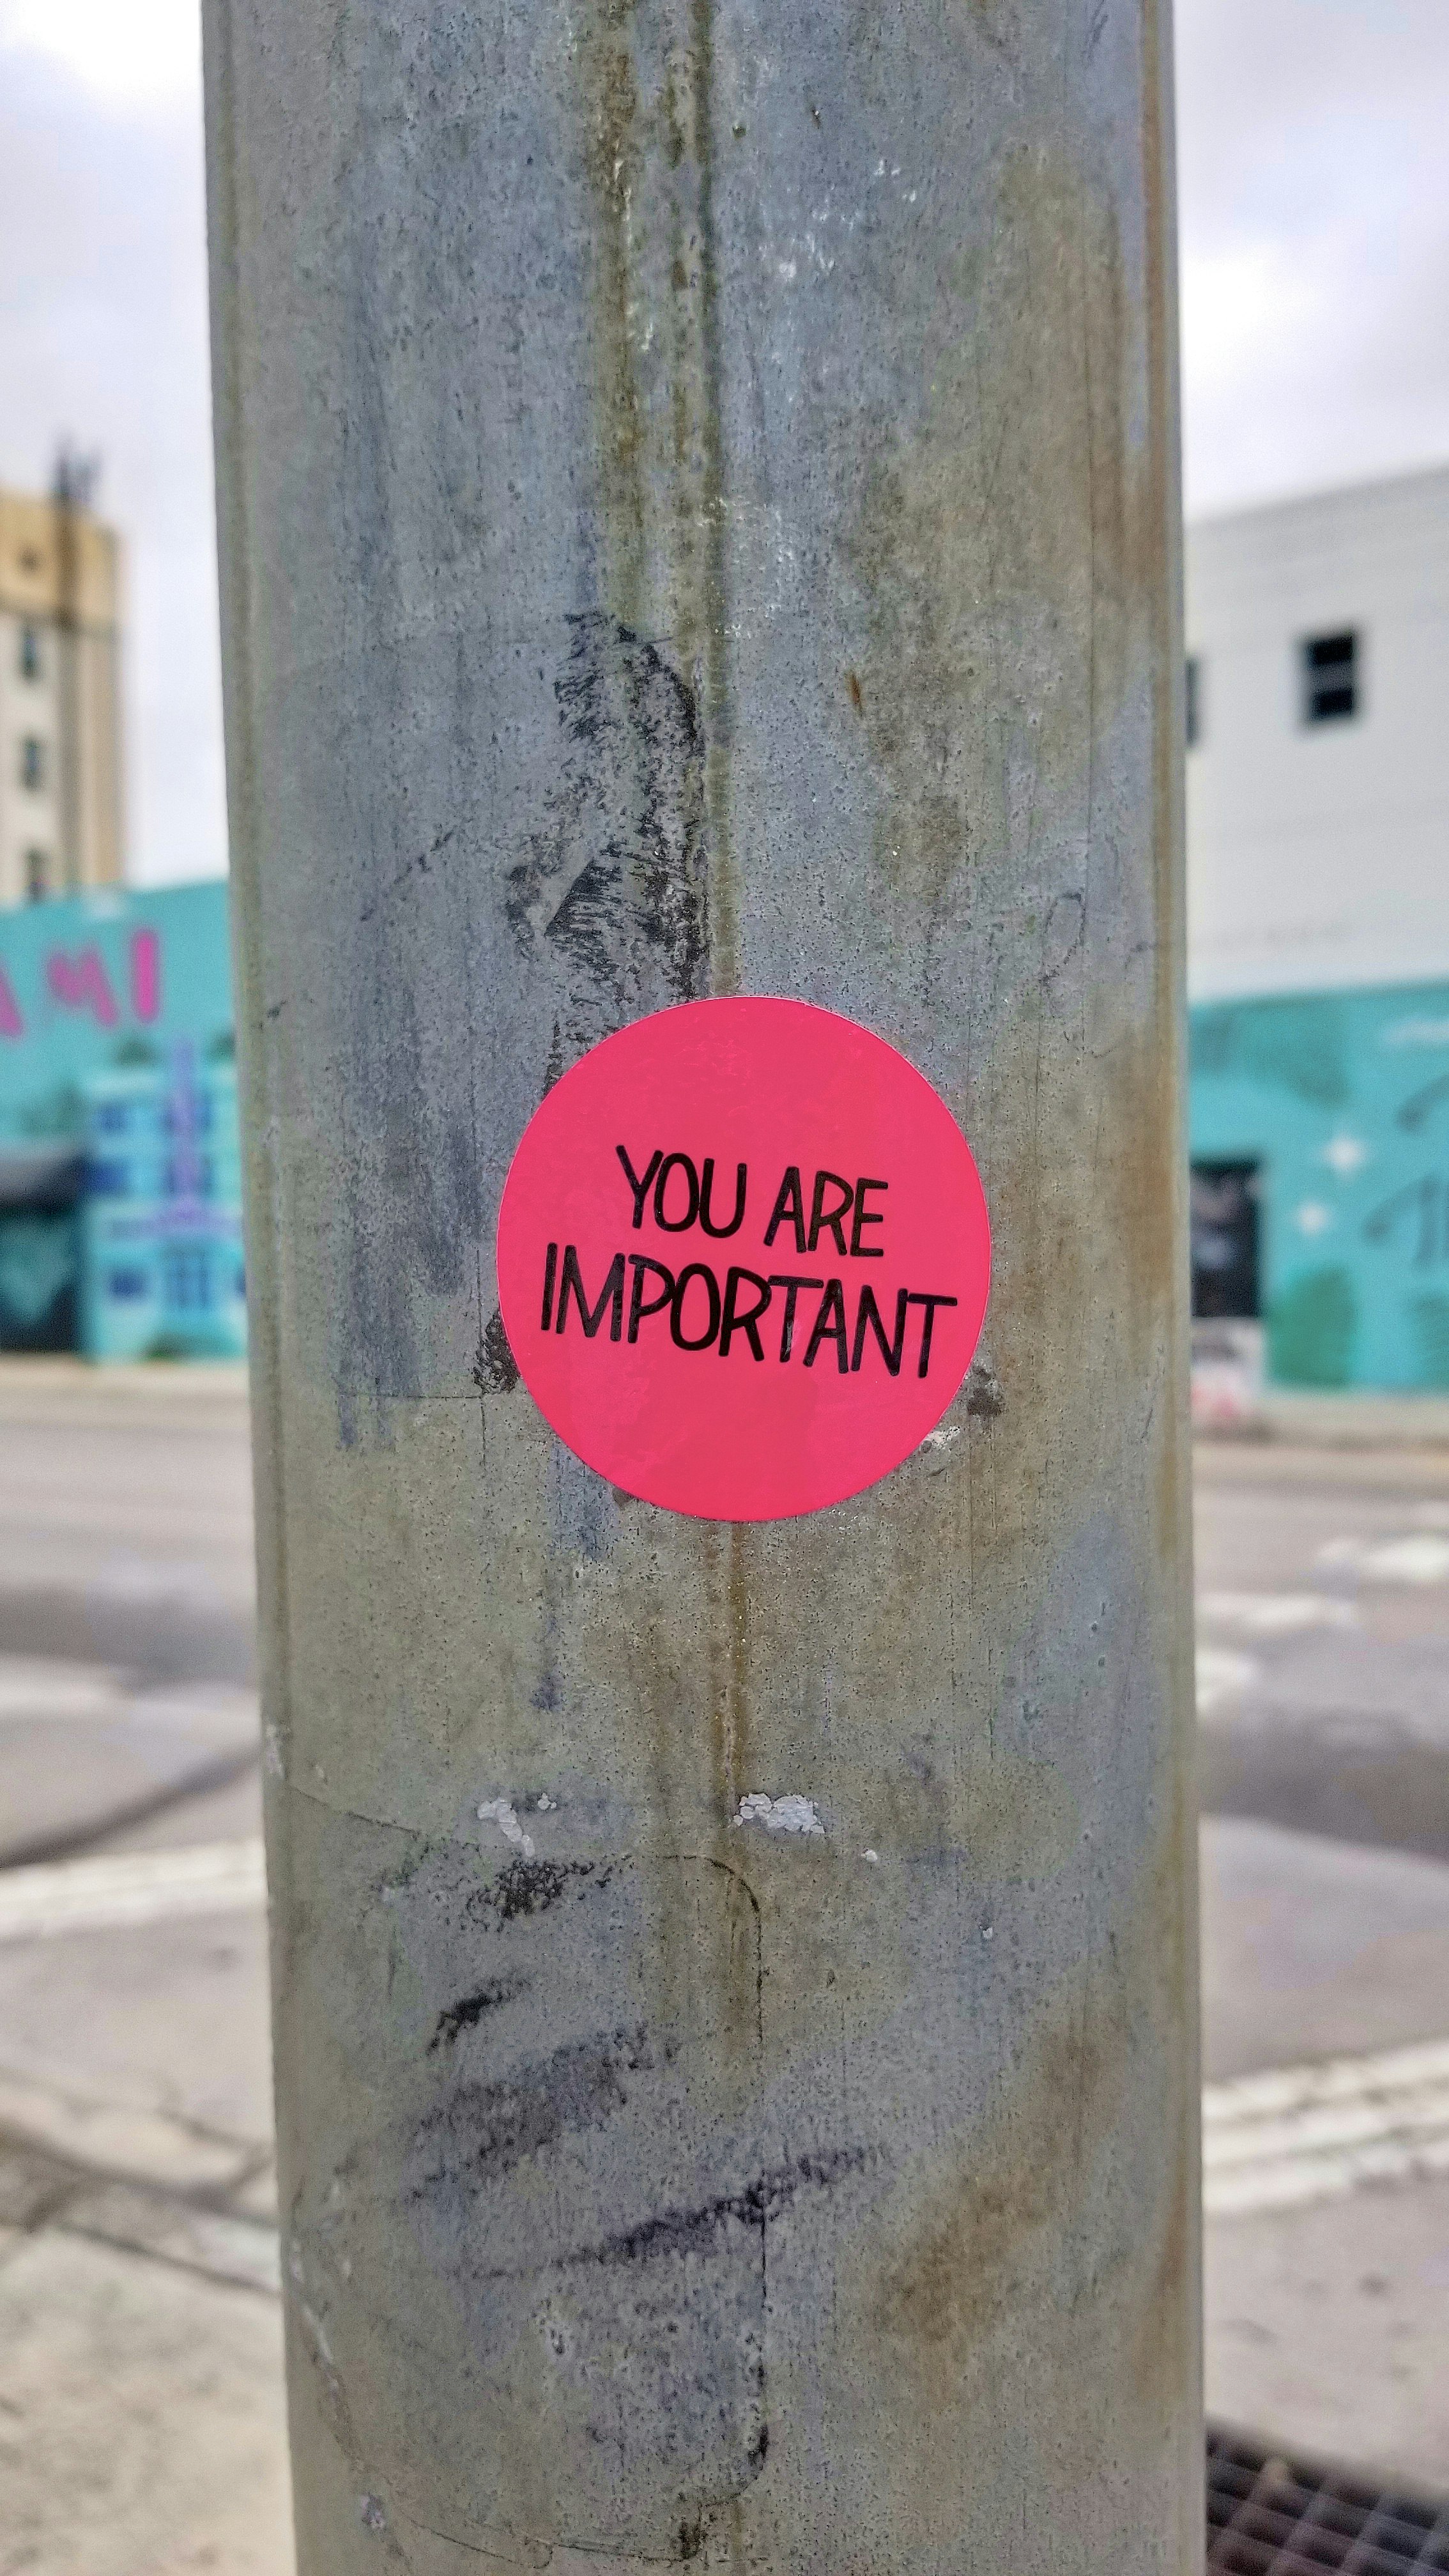 Sticker placed on a pole at the corner of a street